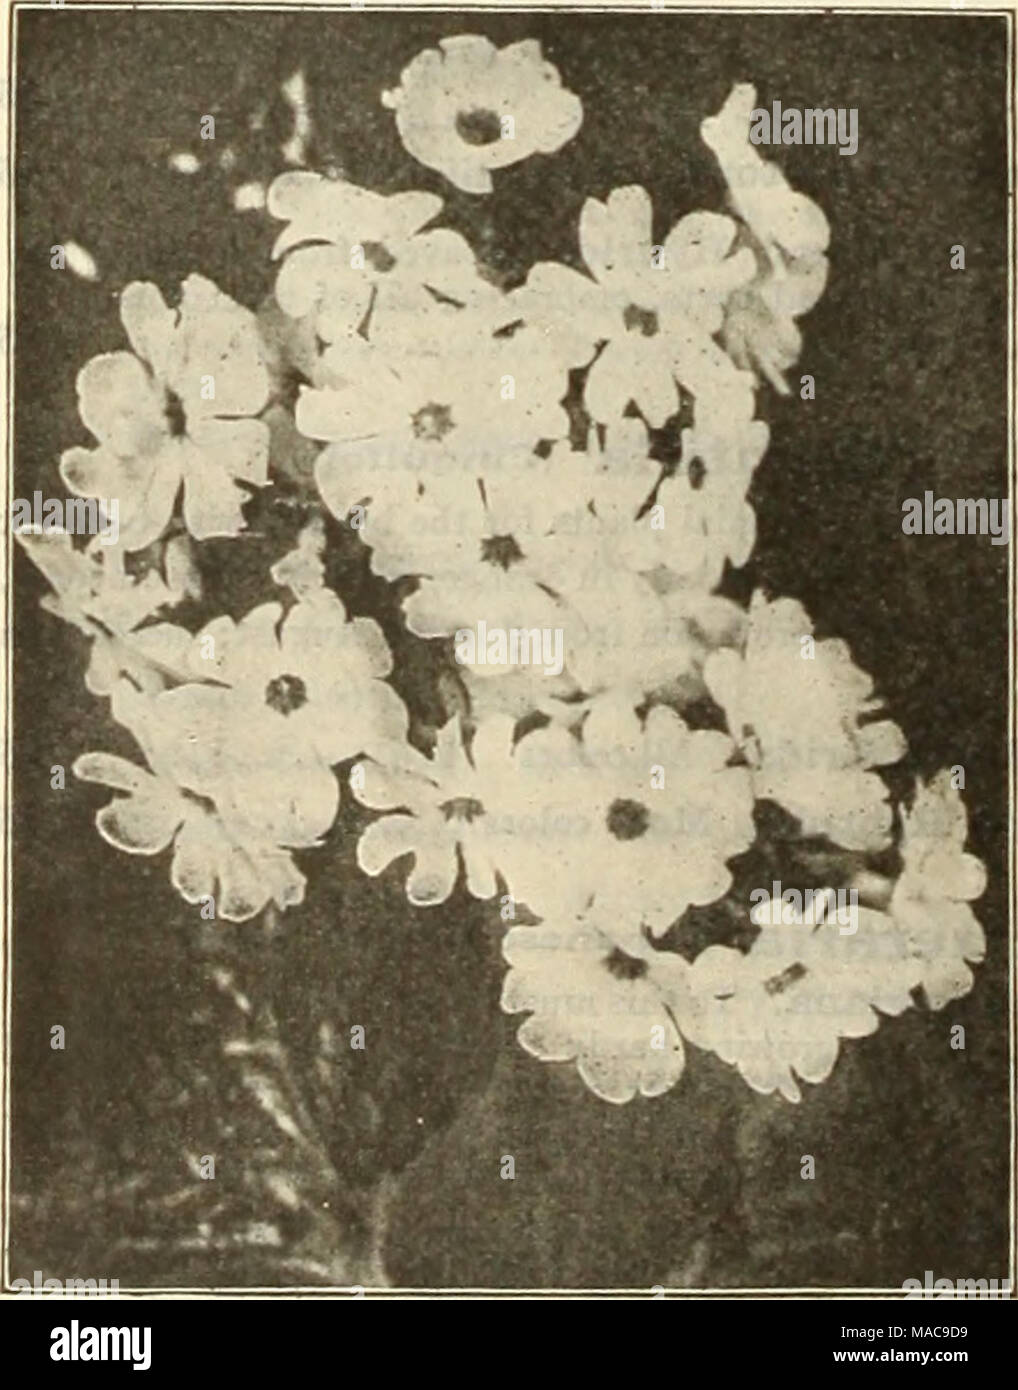 . Dreer's mid-summer list 1925 . Primula Obconica Grandiflora Dreer's &quot;Peerless&quot; Chinese Primroses Various Primroses PER PKT. 3824 Kewensis. This variety is most attractive, with pleas- ing bright yellow flowers borne on long stems. It is delightfully fragrant and -lands well as a house plant. SO 25 3826 Malacoides (Improved Baby Primrose). A fine house plant, flowers delicate lilac. 15 3828 -Rosea. A beautiful bright rose variety 25 1500 Auricula. A well-known favor- ite of great beauty; seed saved from splendid choice mixed varieties; 6 inches 25 2112 Cowslip, Invincible Giant. Pri Stock Photo